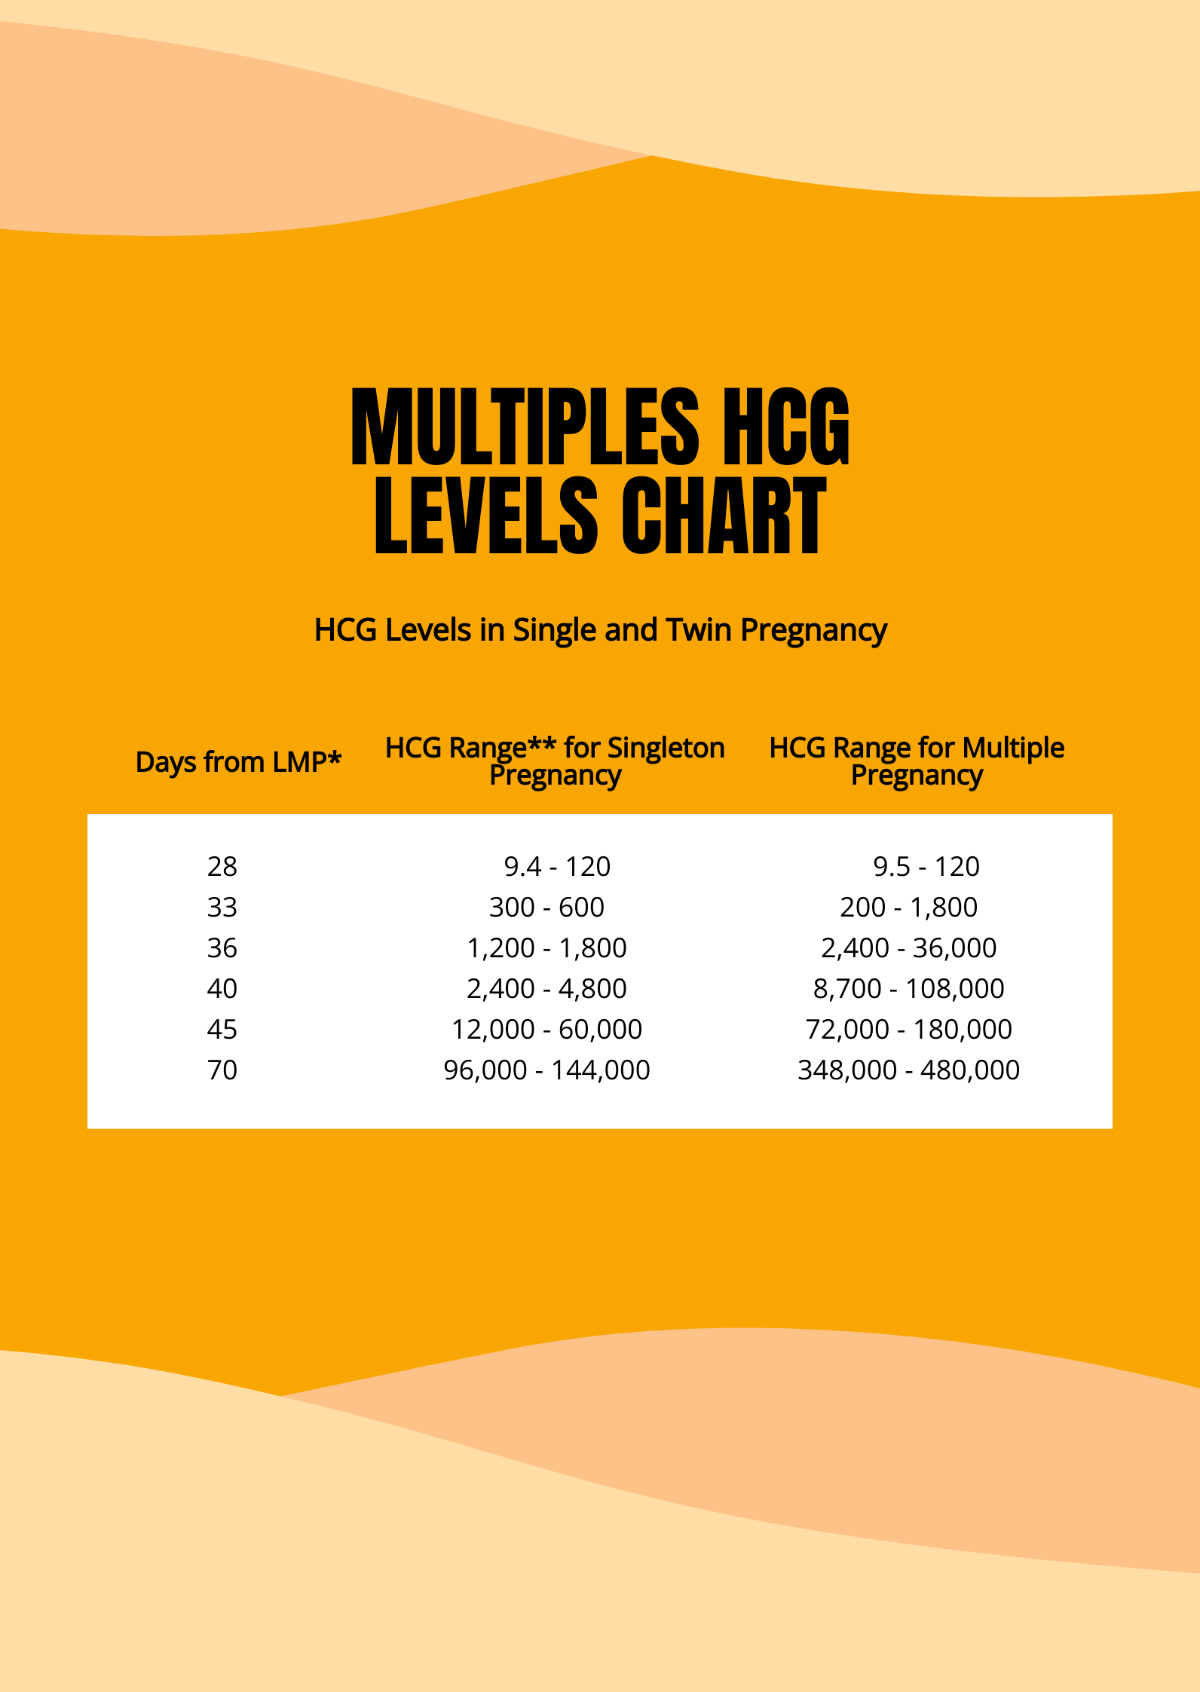 Multiples HCG Levels Chart Template